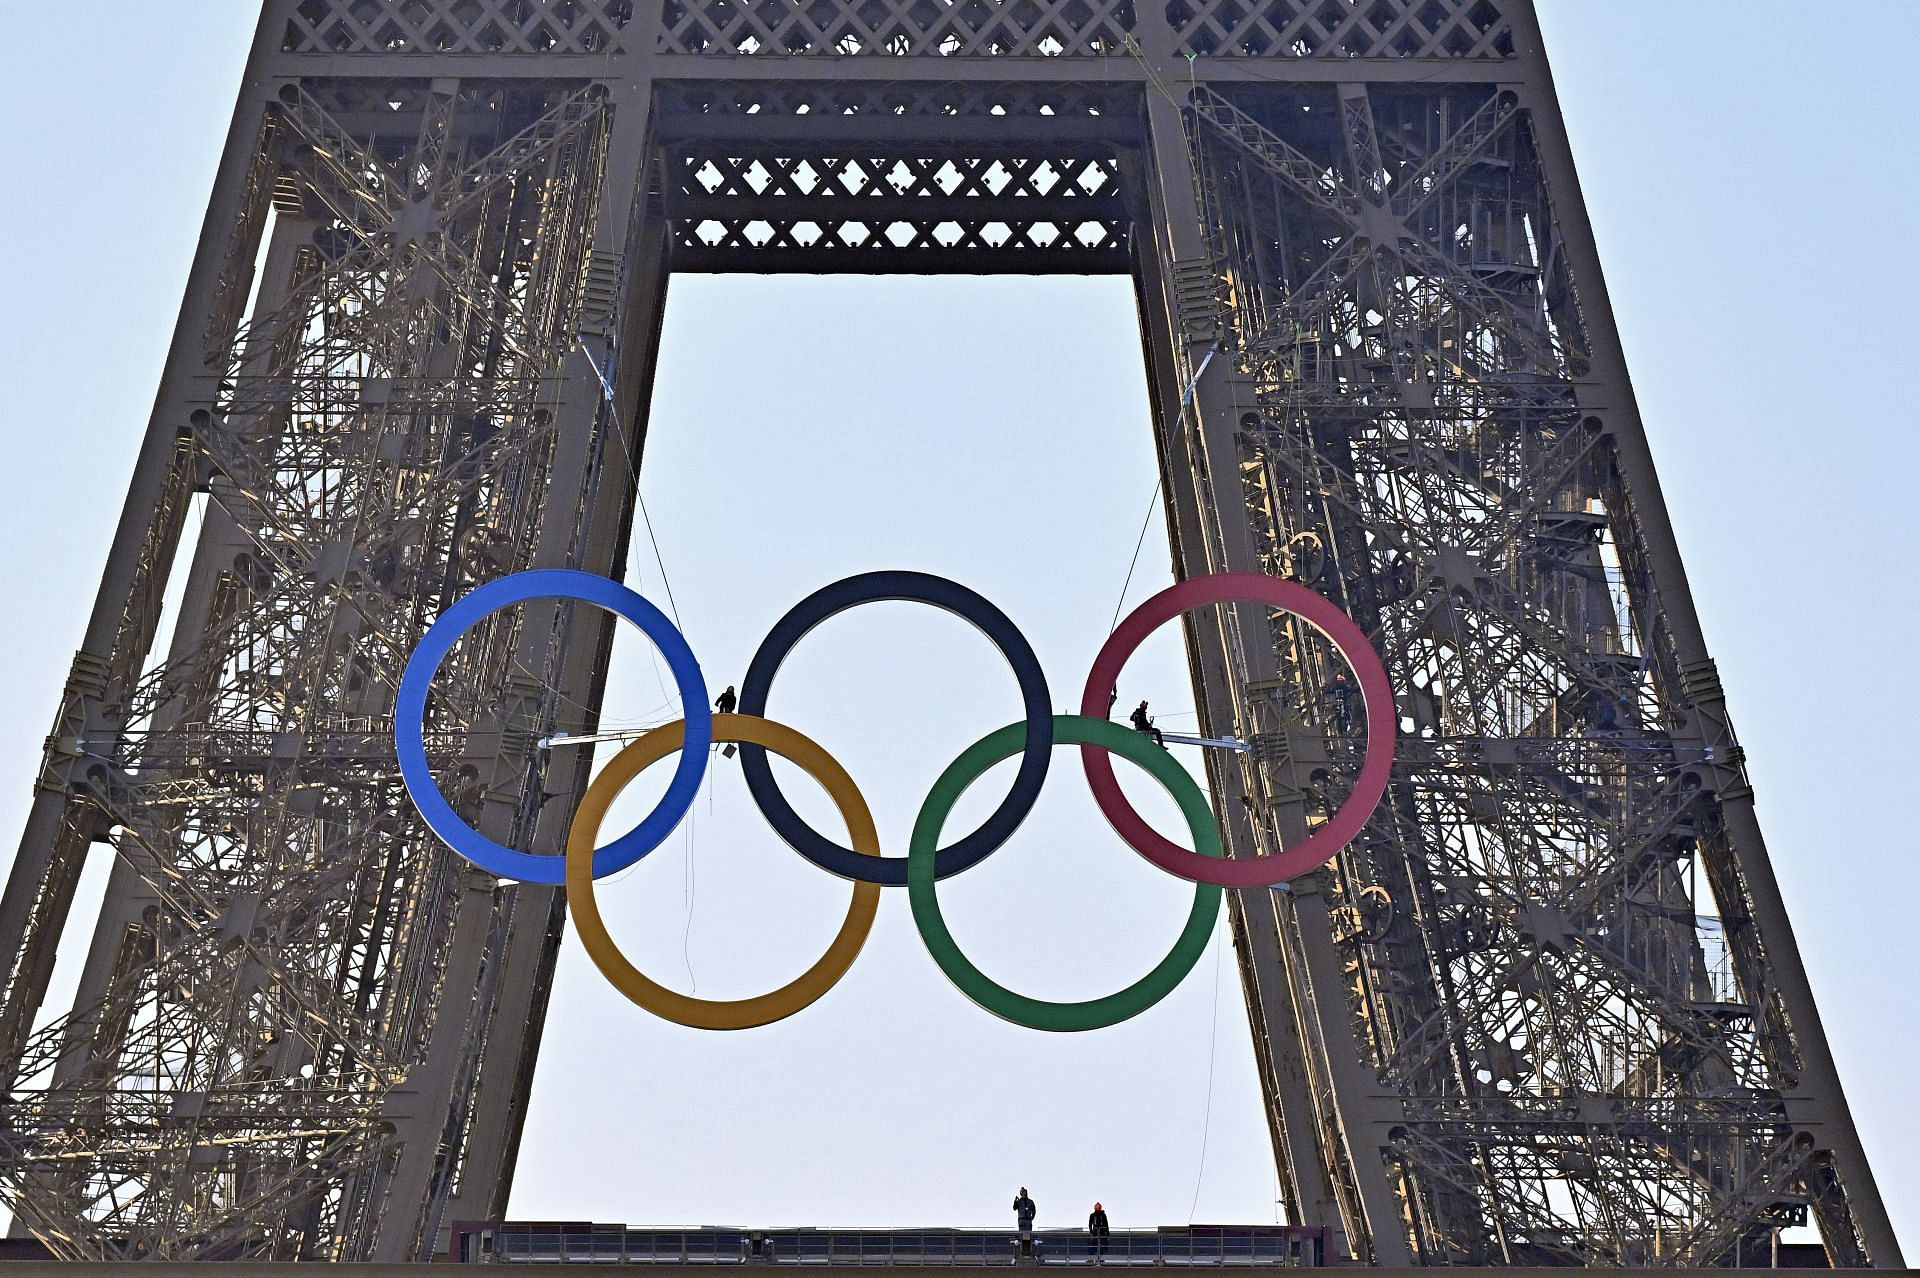 The Olympic Rings are displayed on the Eiffel Tower - 50 days before the opening of the Olympic Games